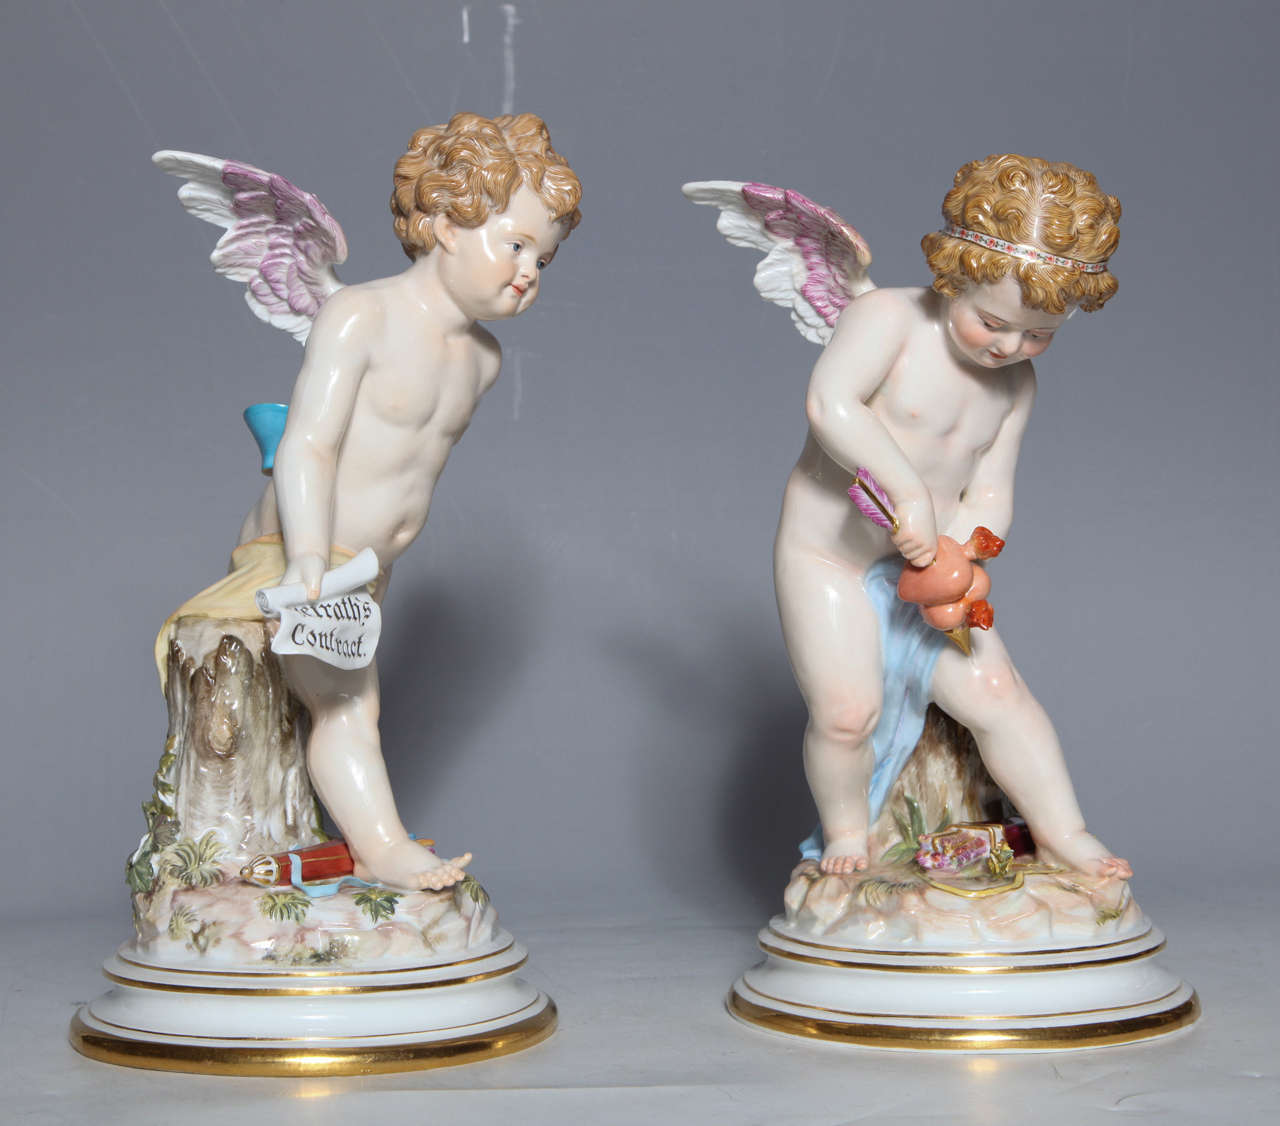 Pair of Meissen Porcelain large Devisenkinder Cupid figurines with superb quality painting and markings from the 1860s. The concept is taken from Otto van Veen’s Emblemes of Love published in Antwerp in 1608 with verses in Latin, English, and